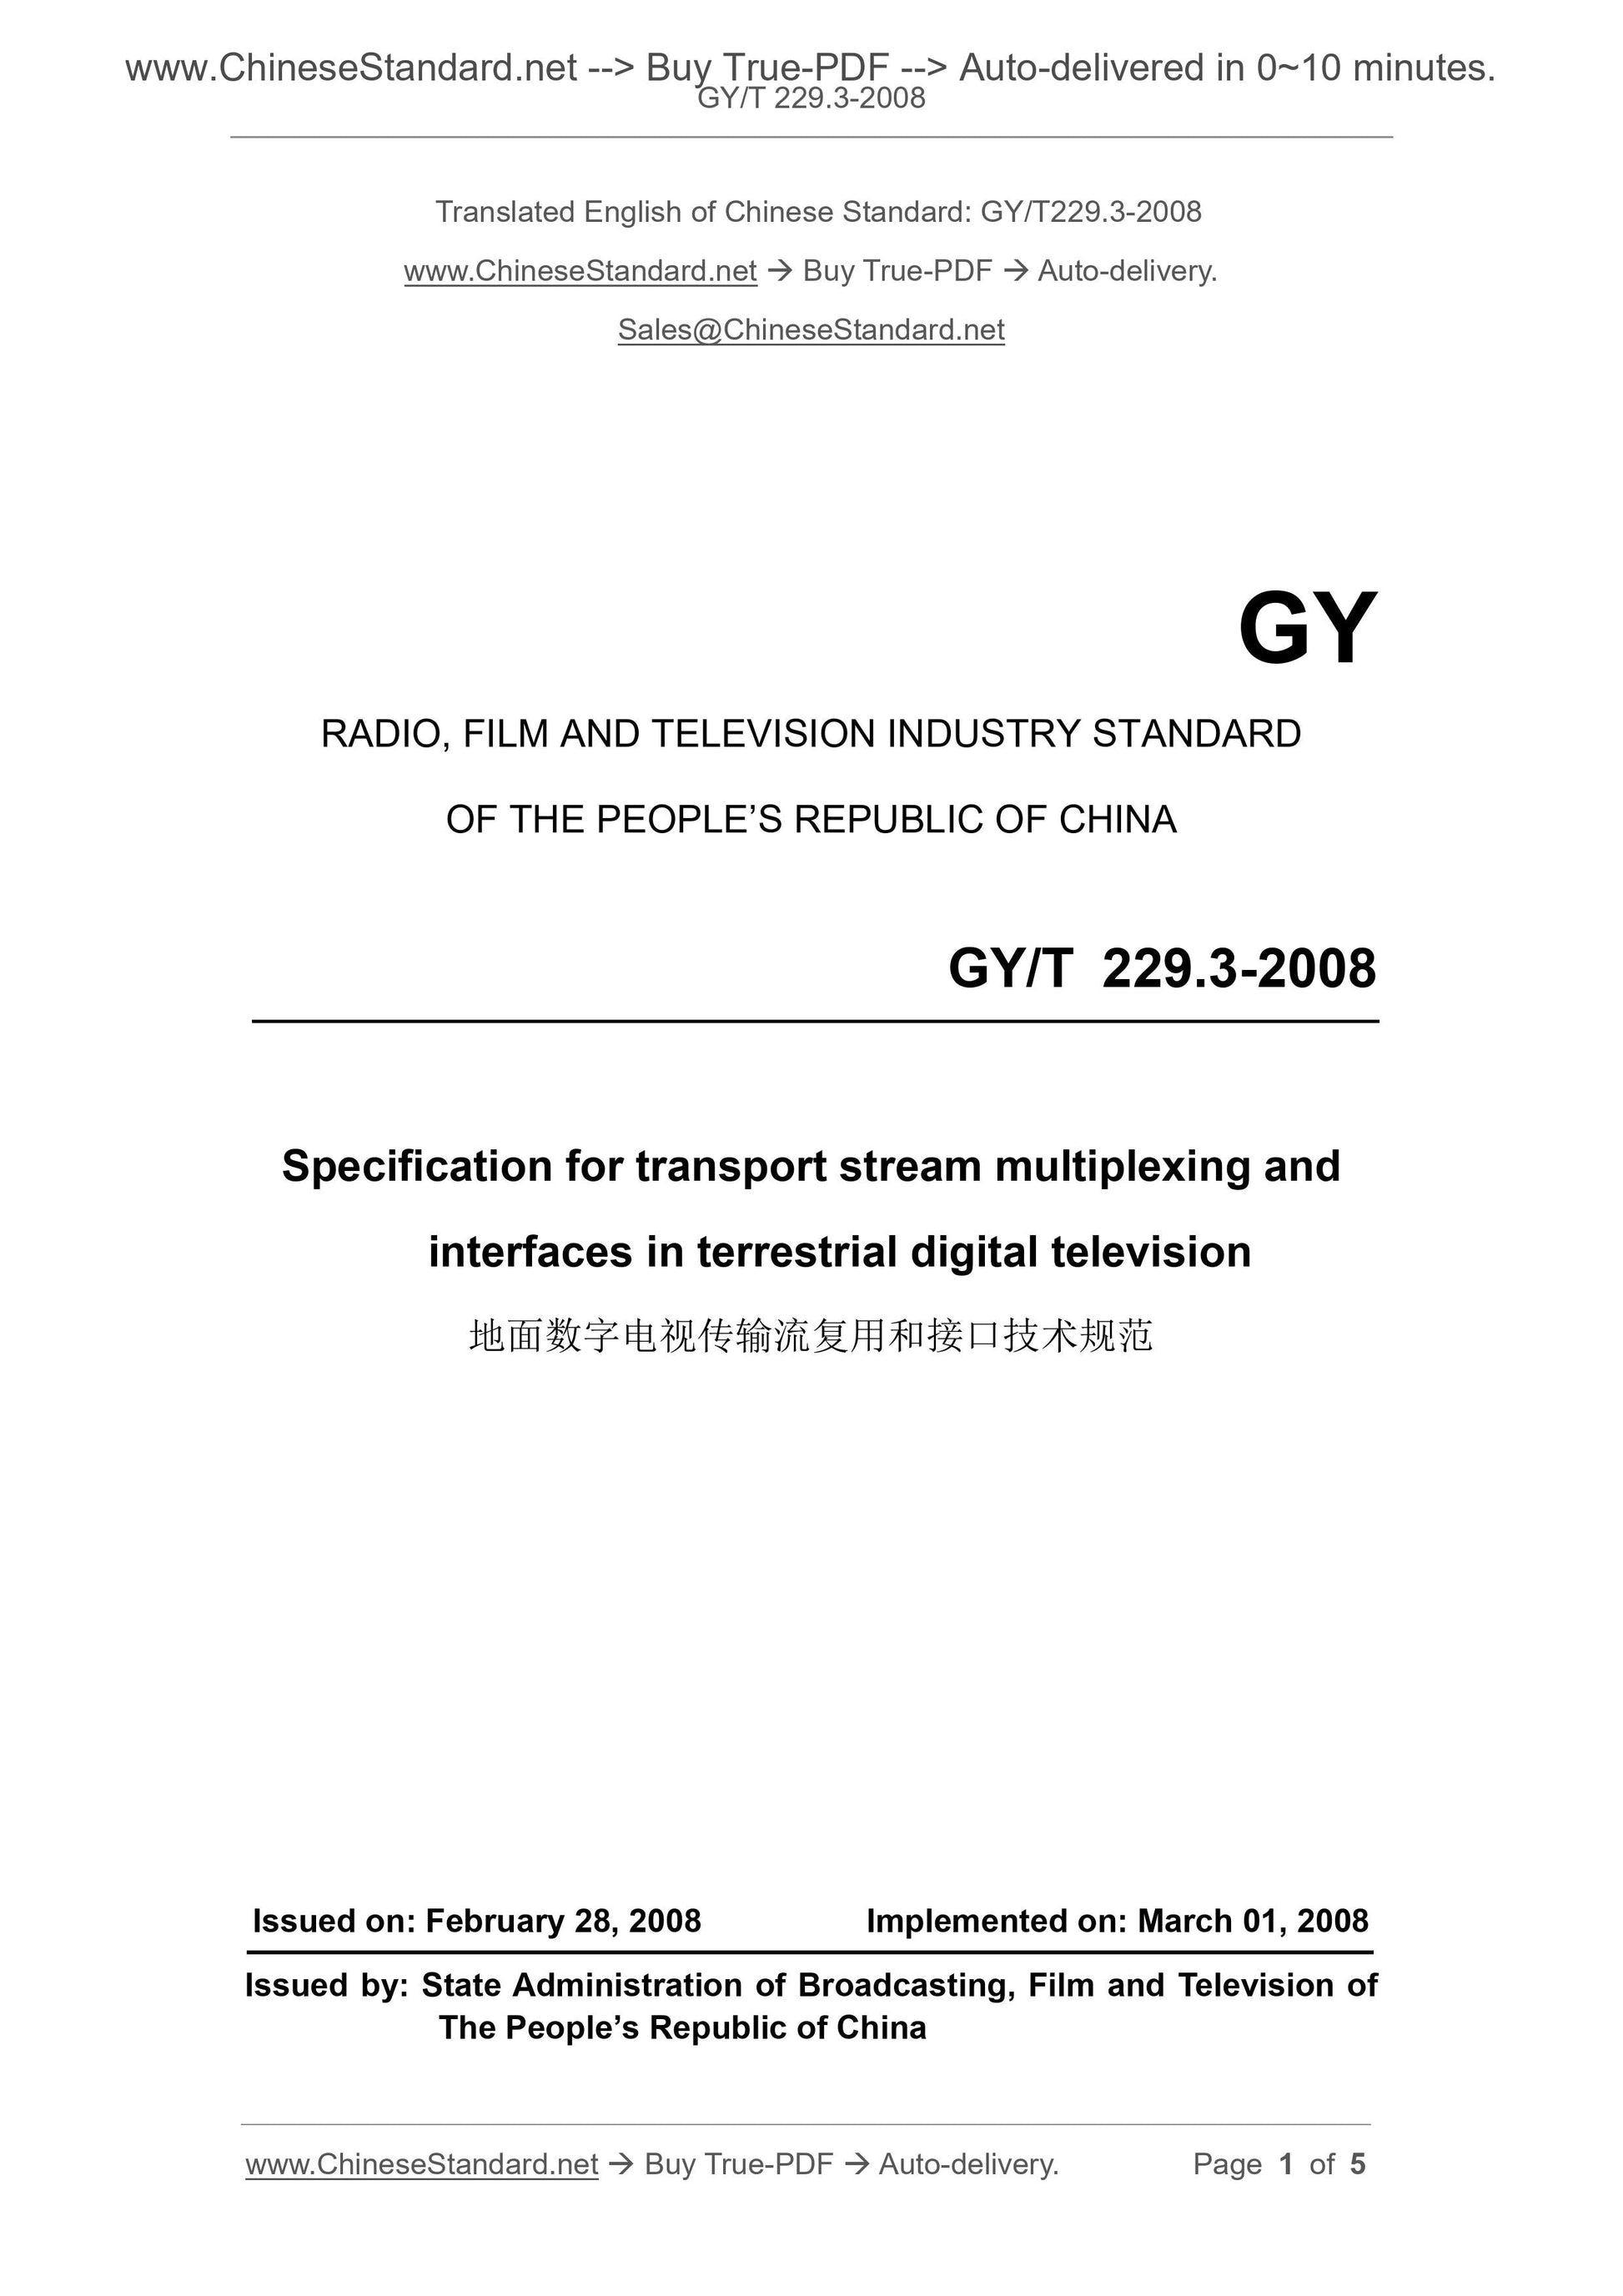 GY/T 229.3-2008 Page 1